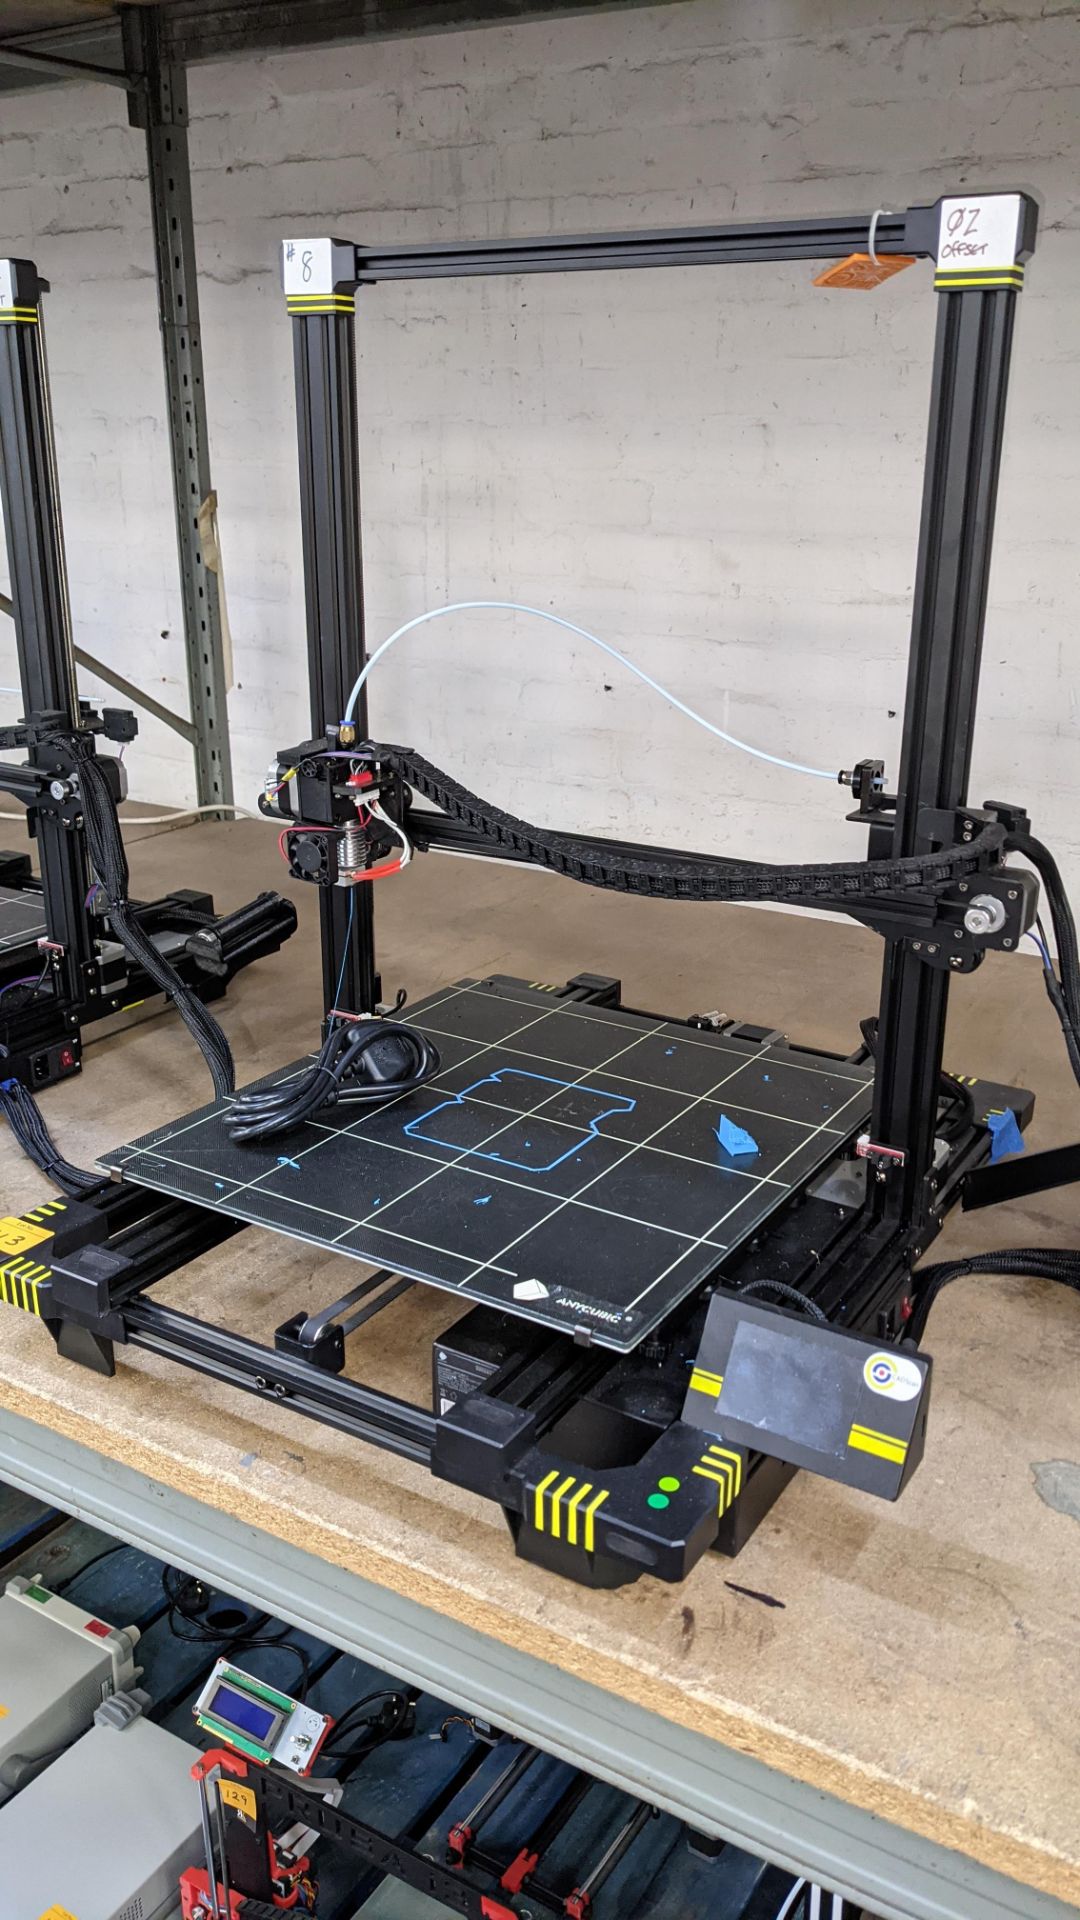 Anycubic Chiron 3D printer NB Lots 104 - 125 each consist of a similar 3D printer. We bel - Image 7 of 13